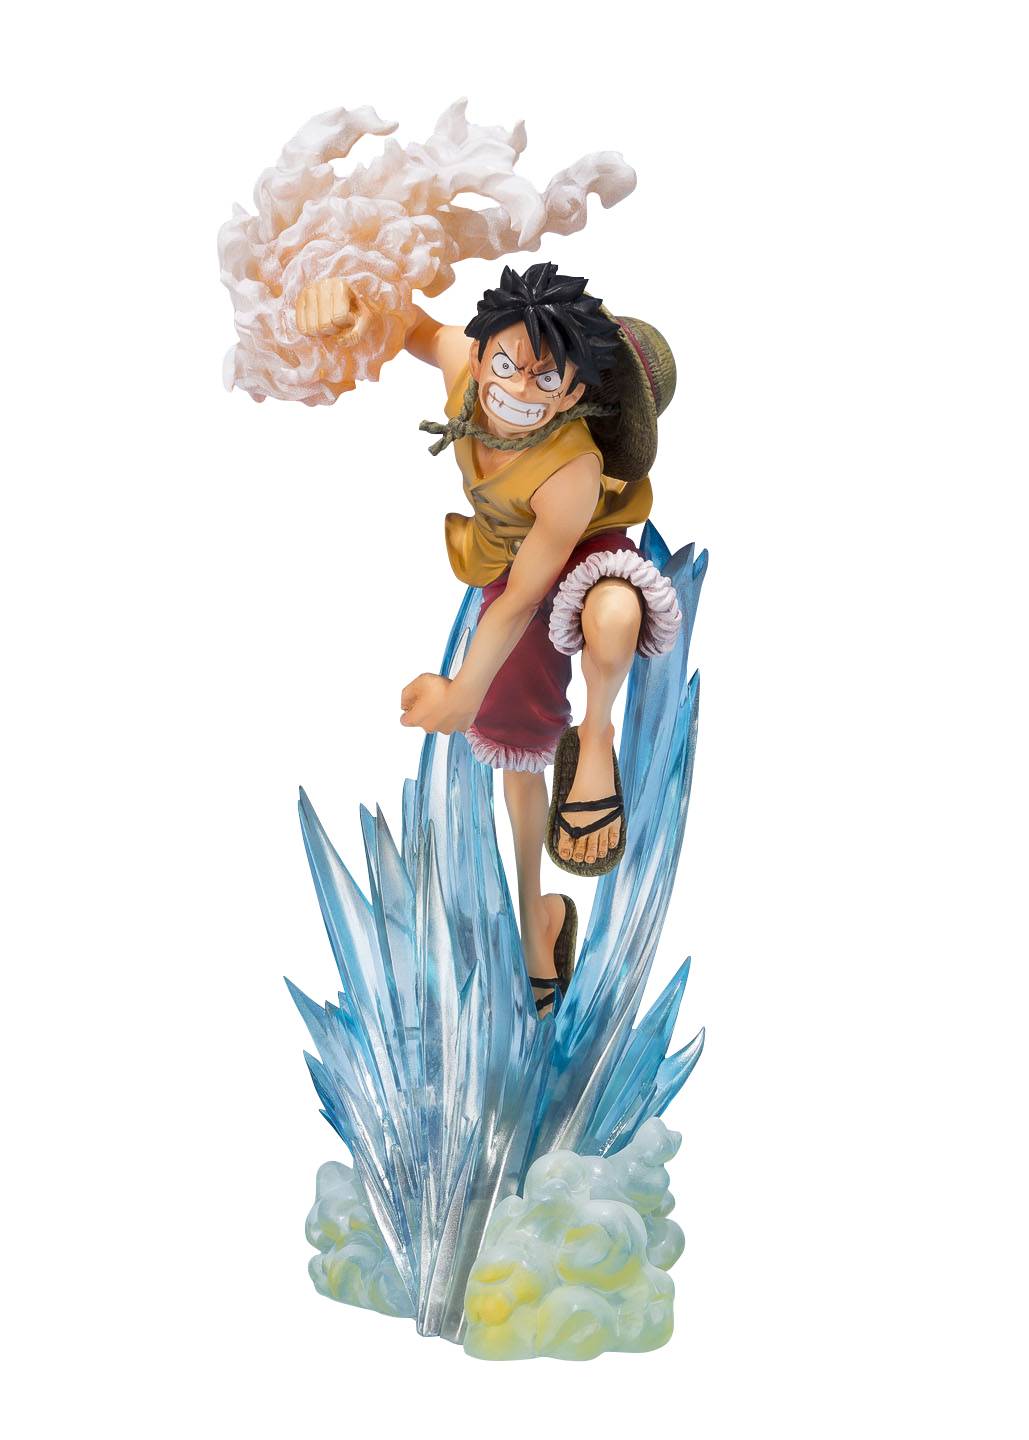 New Monkey D Luffy Punching Pose One Piece Anime Action Figure Toy Statue  Gear | eBay